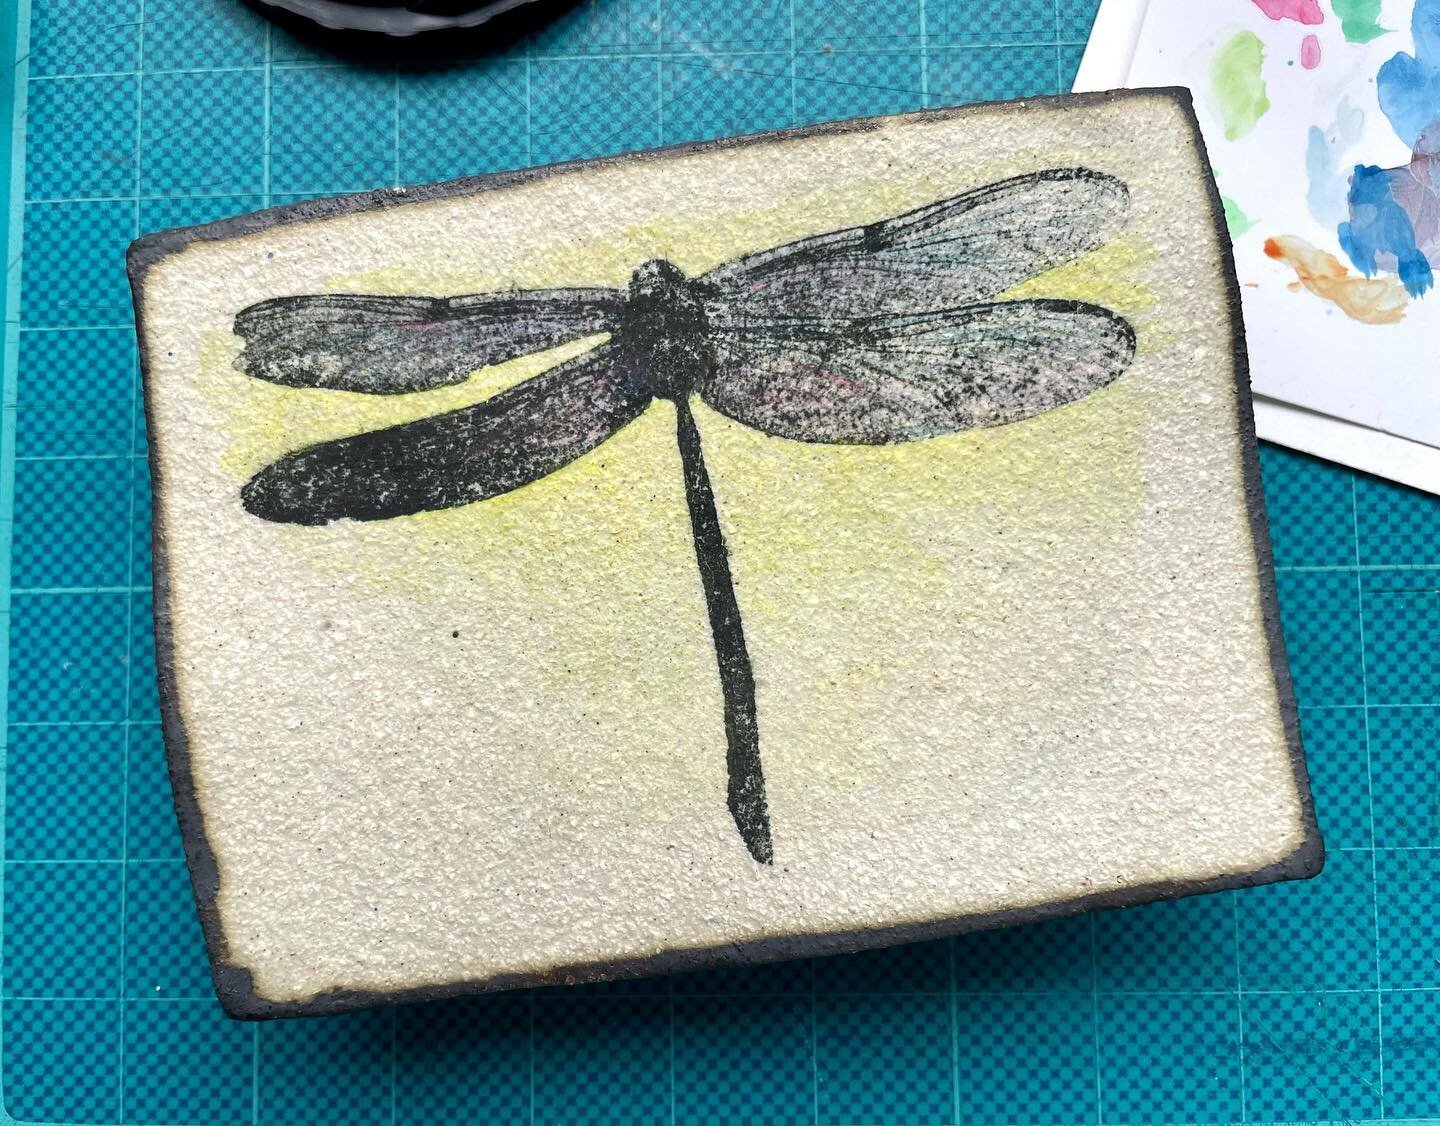 Dragonfly commissioned piece Photograph on Raku clay, hand coloured.